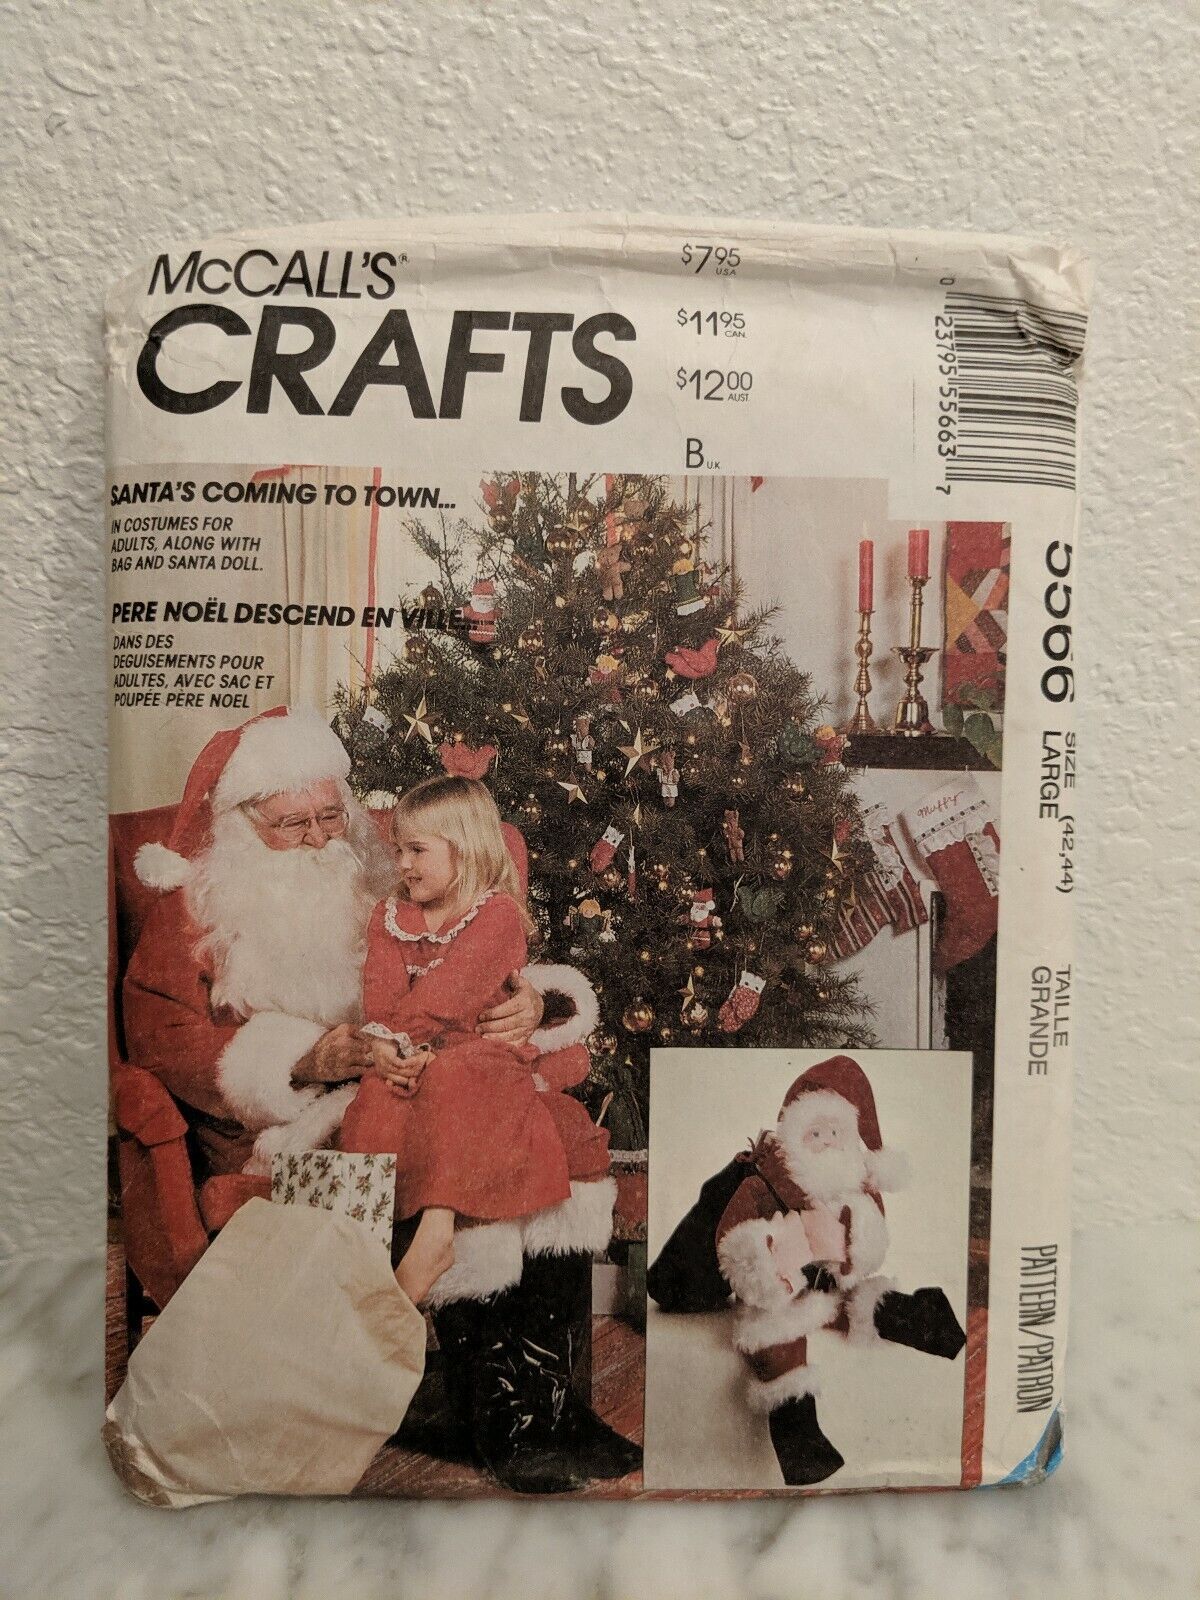 McCall's Crafts Sewing Pattern 5566 Santa Costume Toy Bag Santa Doll Adult Large - $2.43